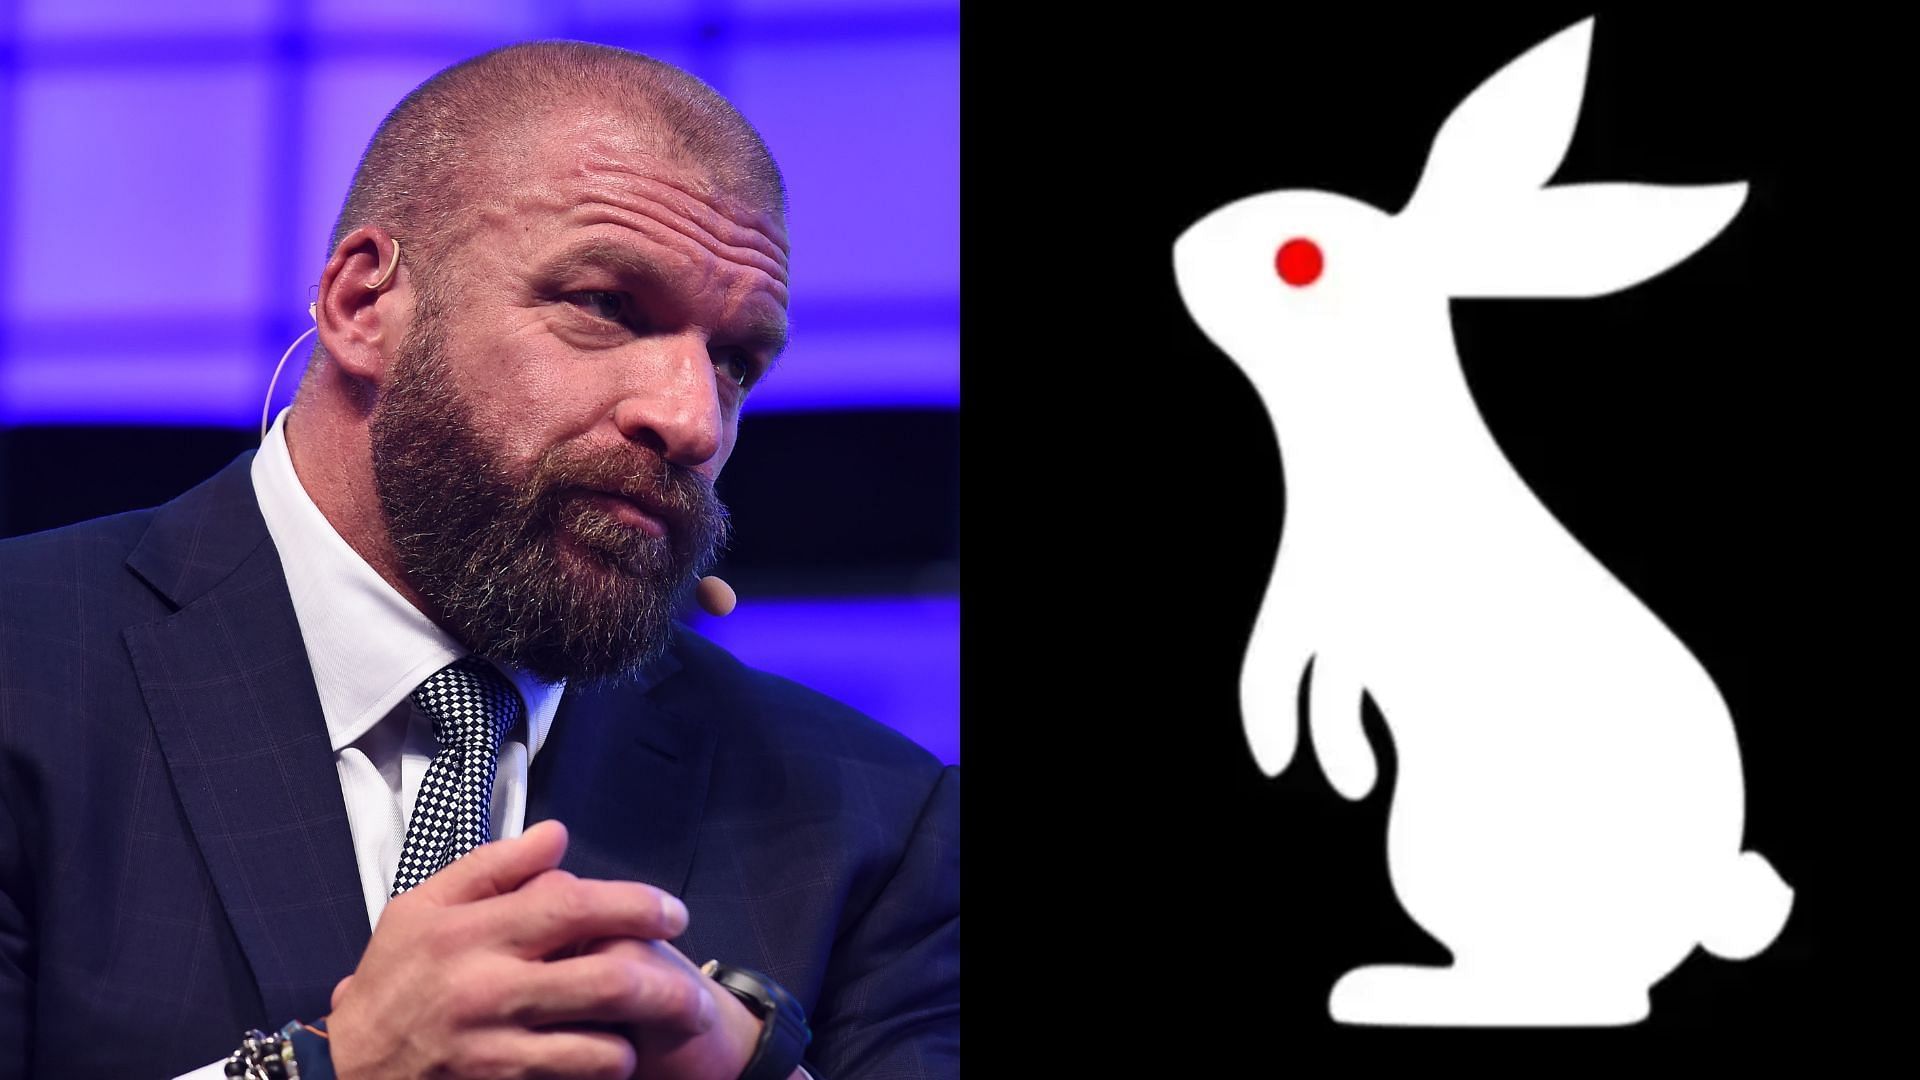 Triple H was recently named Chief Content Officer of WWE